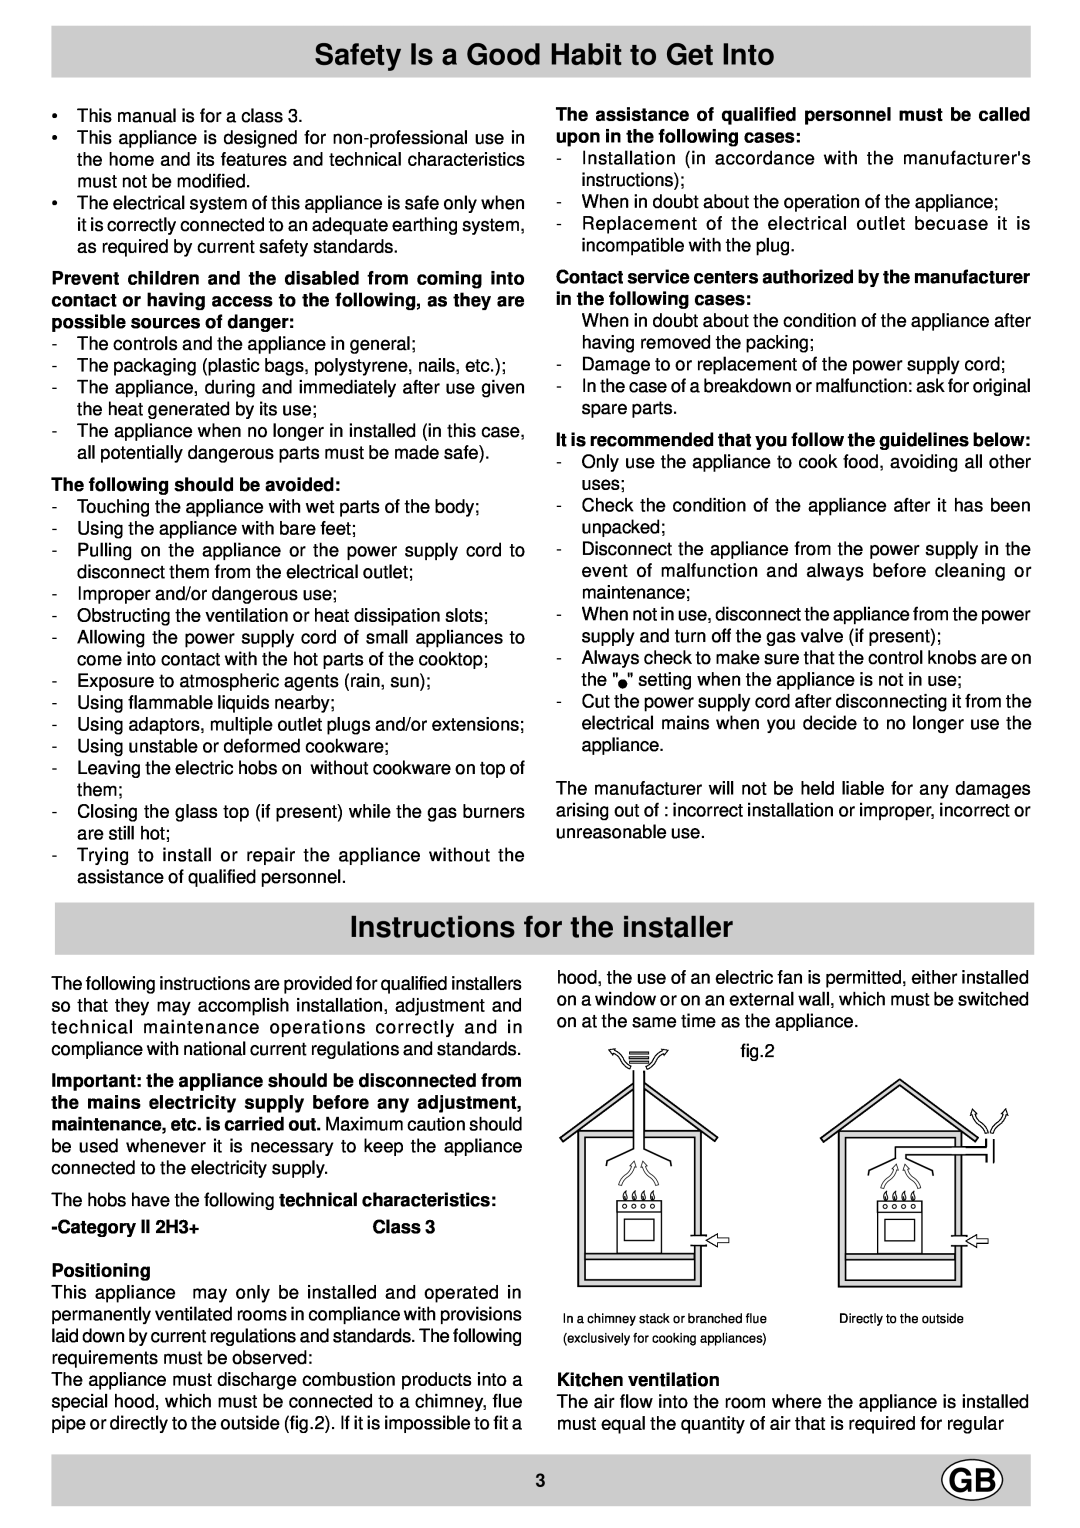 Indesit P 640 TC (IX) manual Safety Is a Good Habit to Get Into, Instructions for the installer 